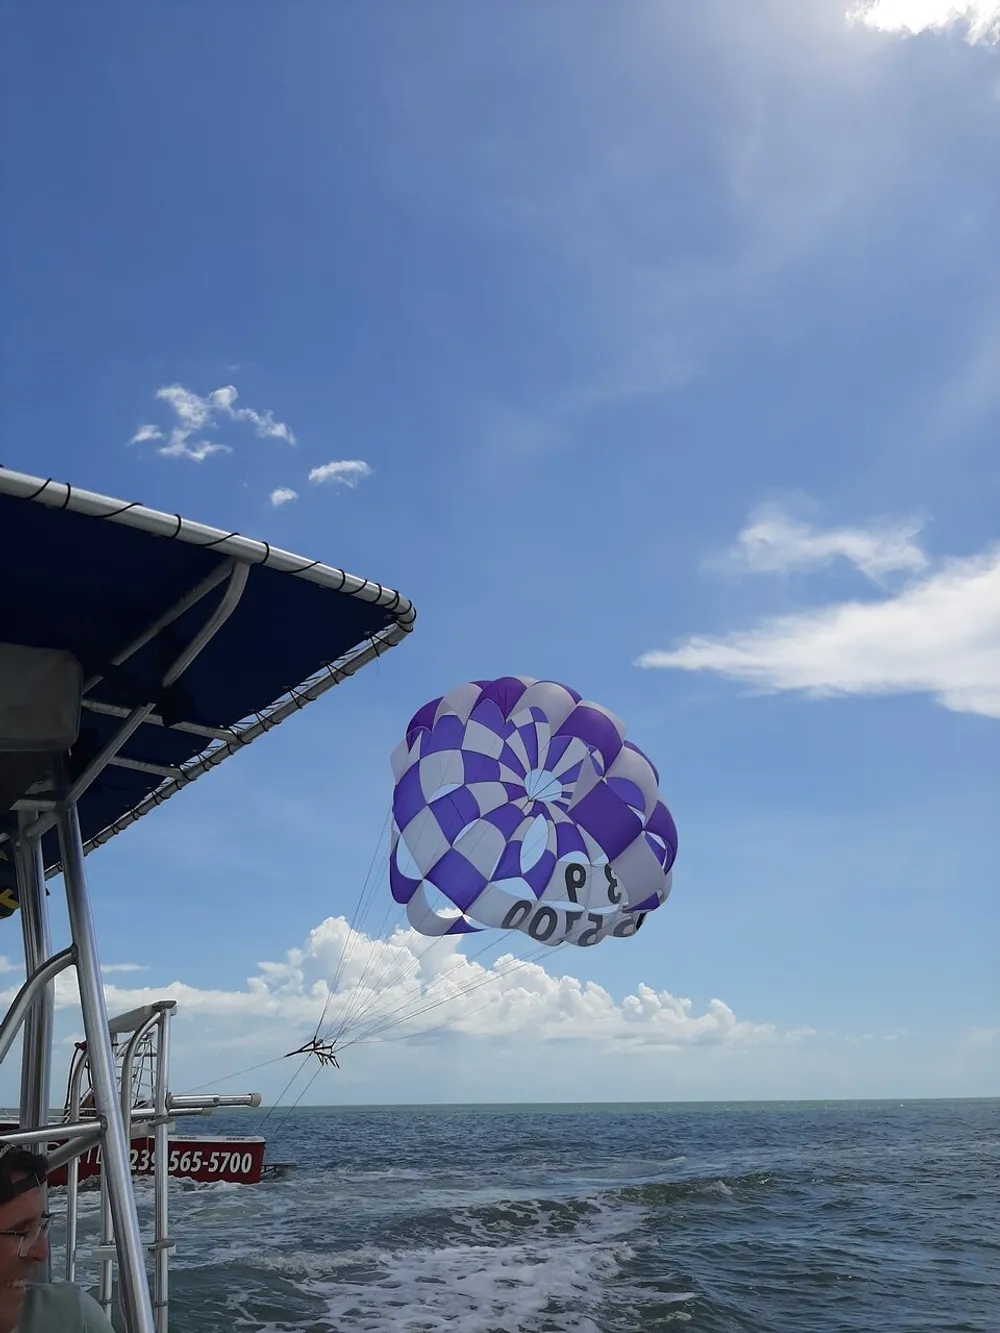 A person is parasailing over the ocean on a sunny day tethered to a boat with a colorful parachute